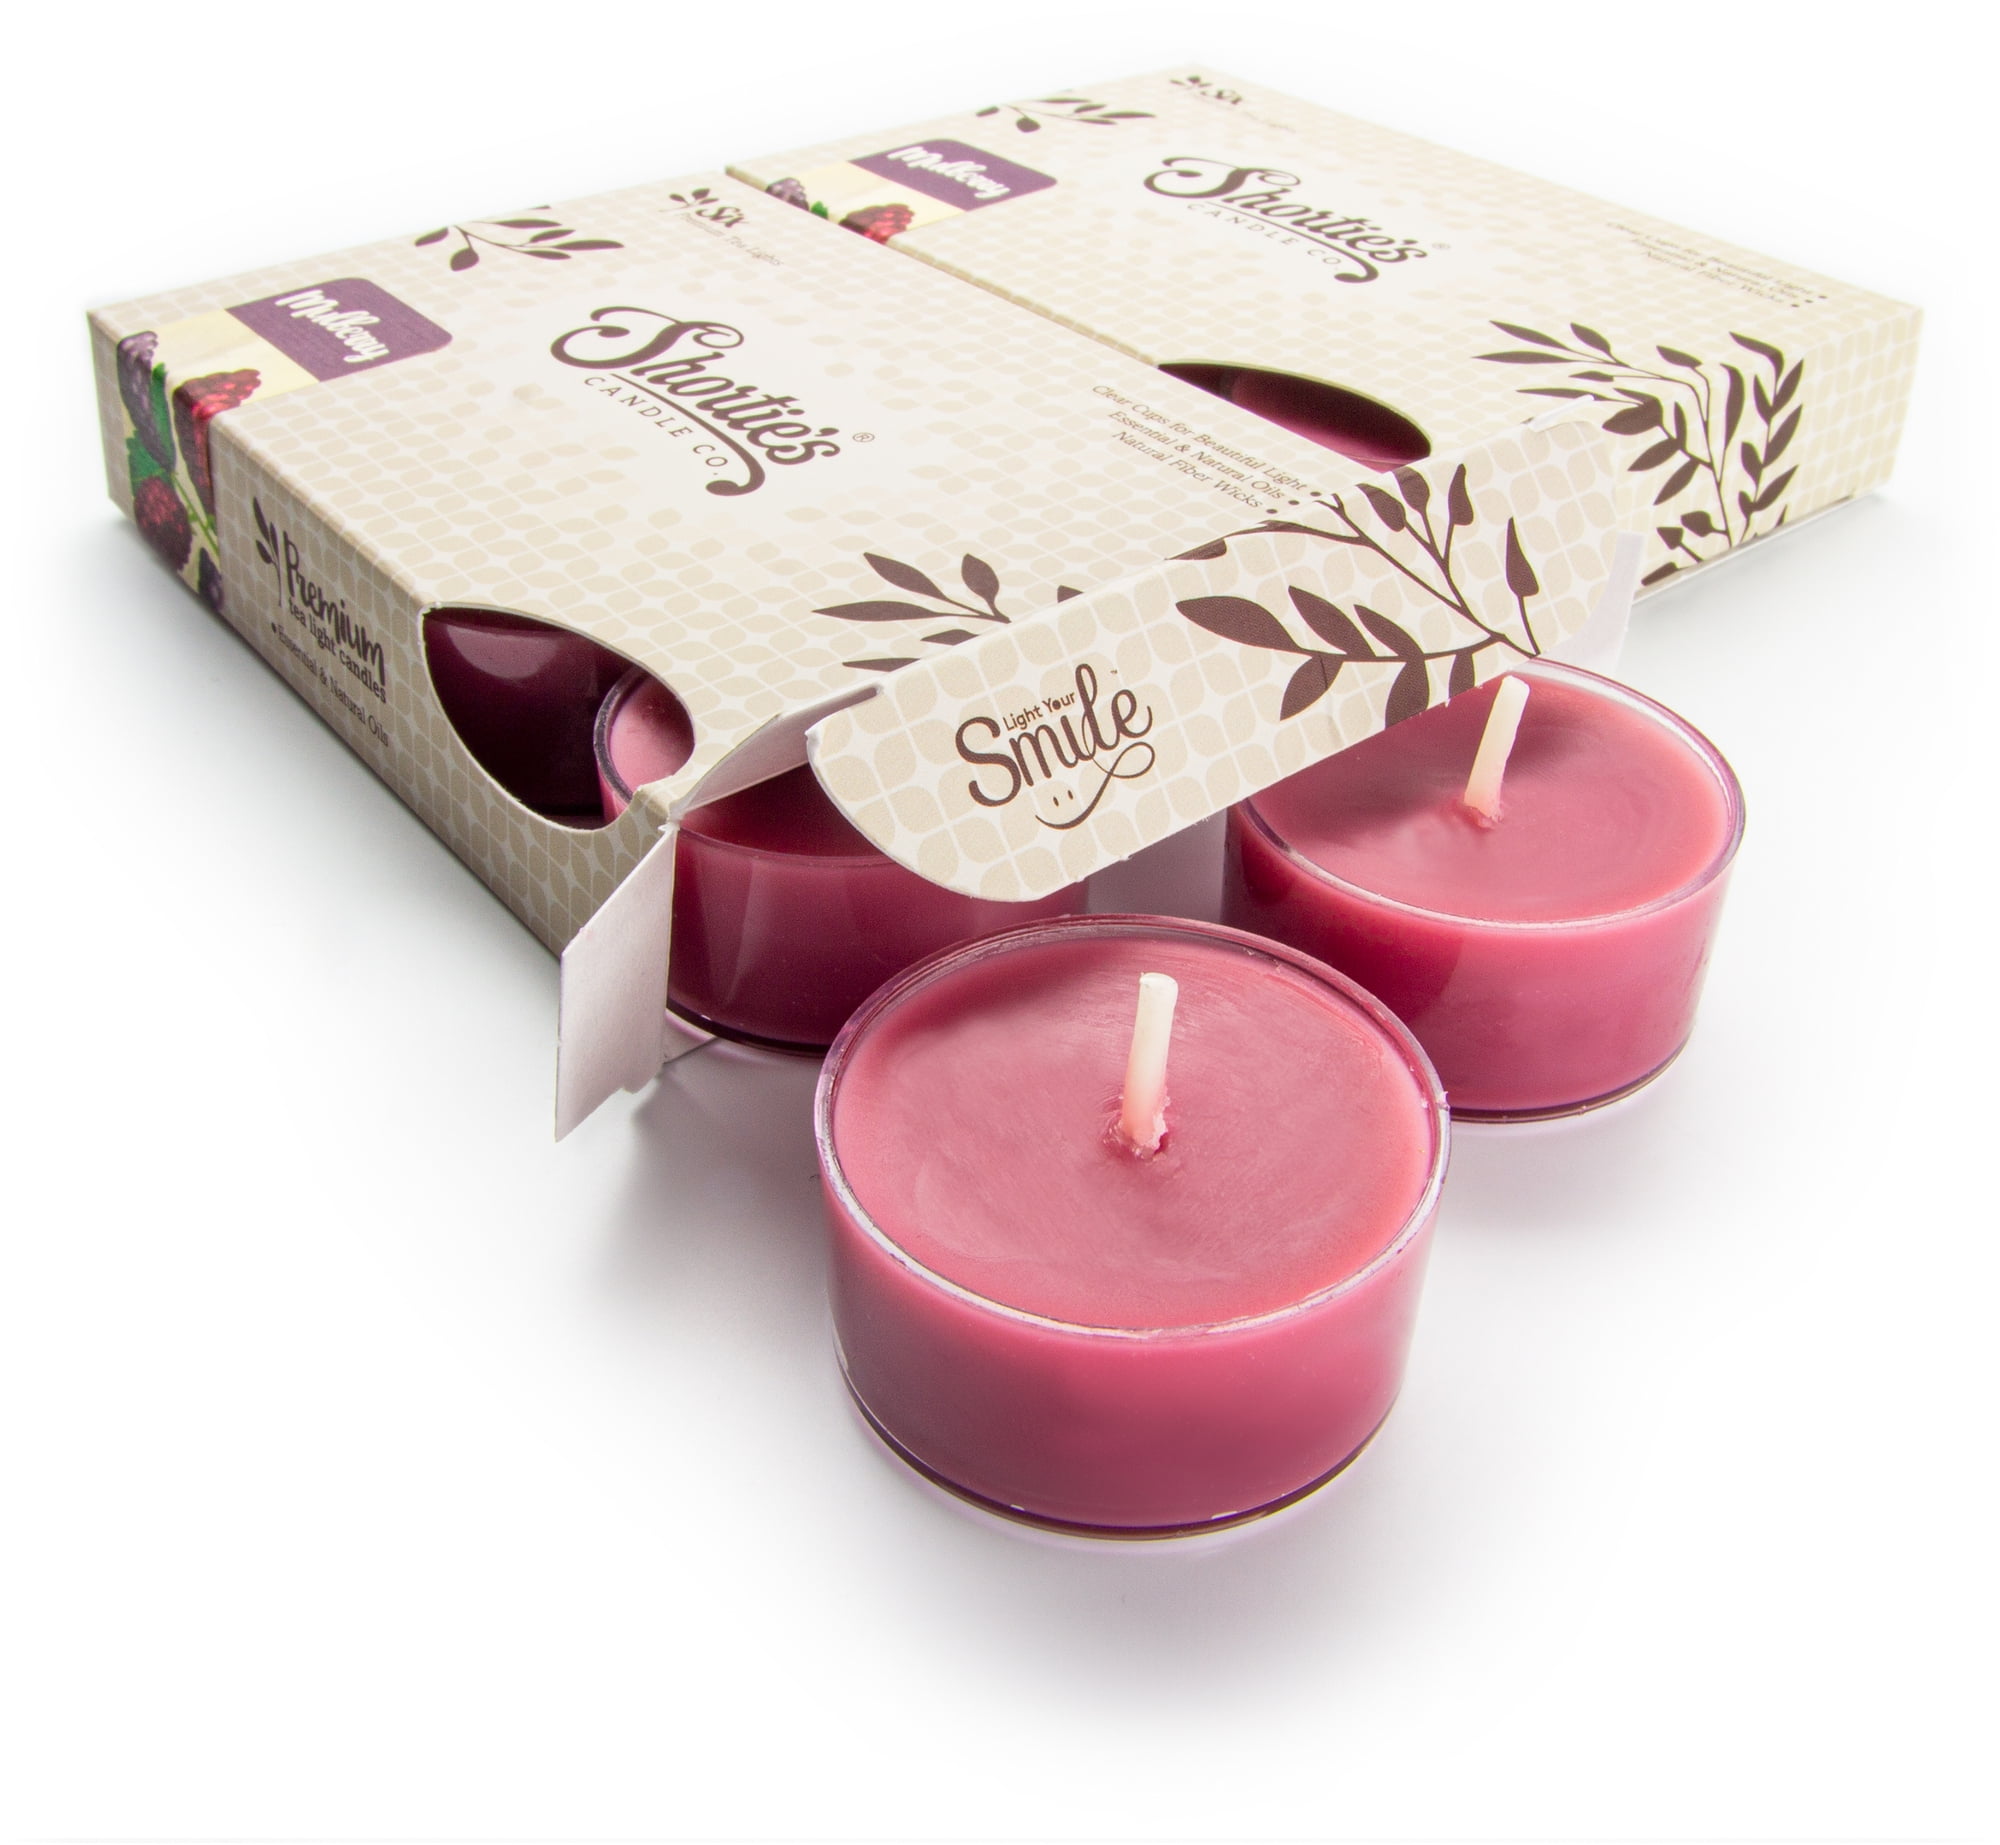 15 Tealight Candles 3 Hour Burn Night Light Cashmere Tealights Party Scent 